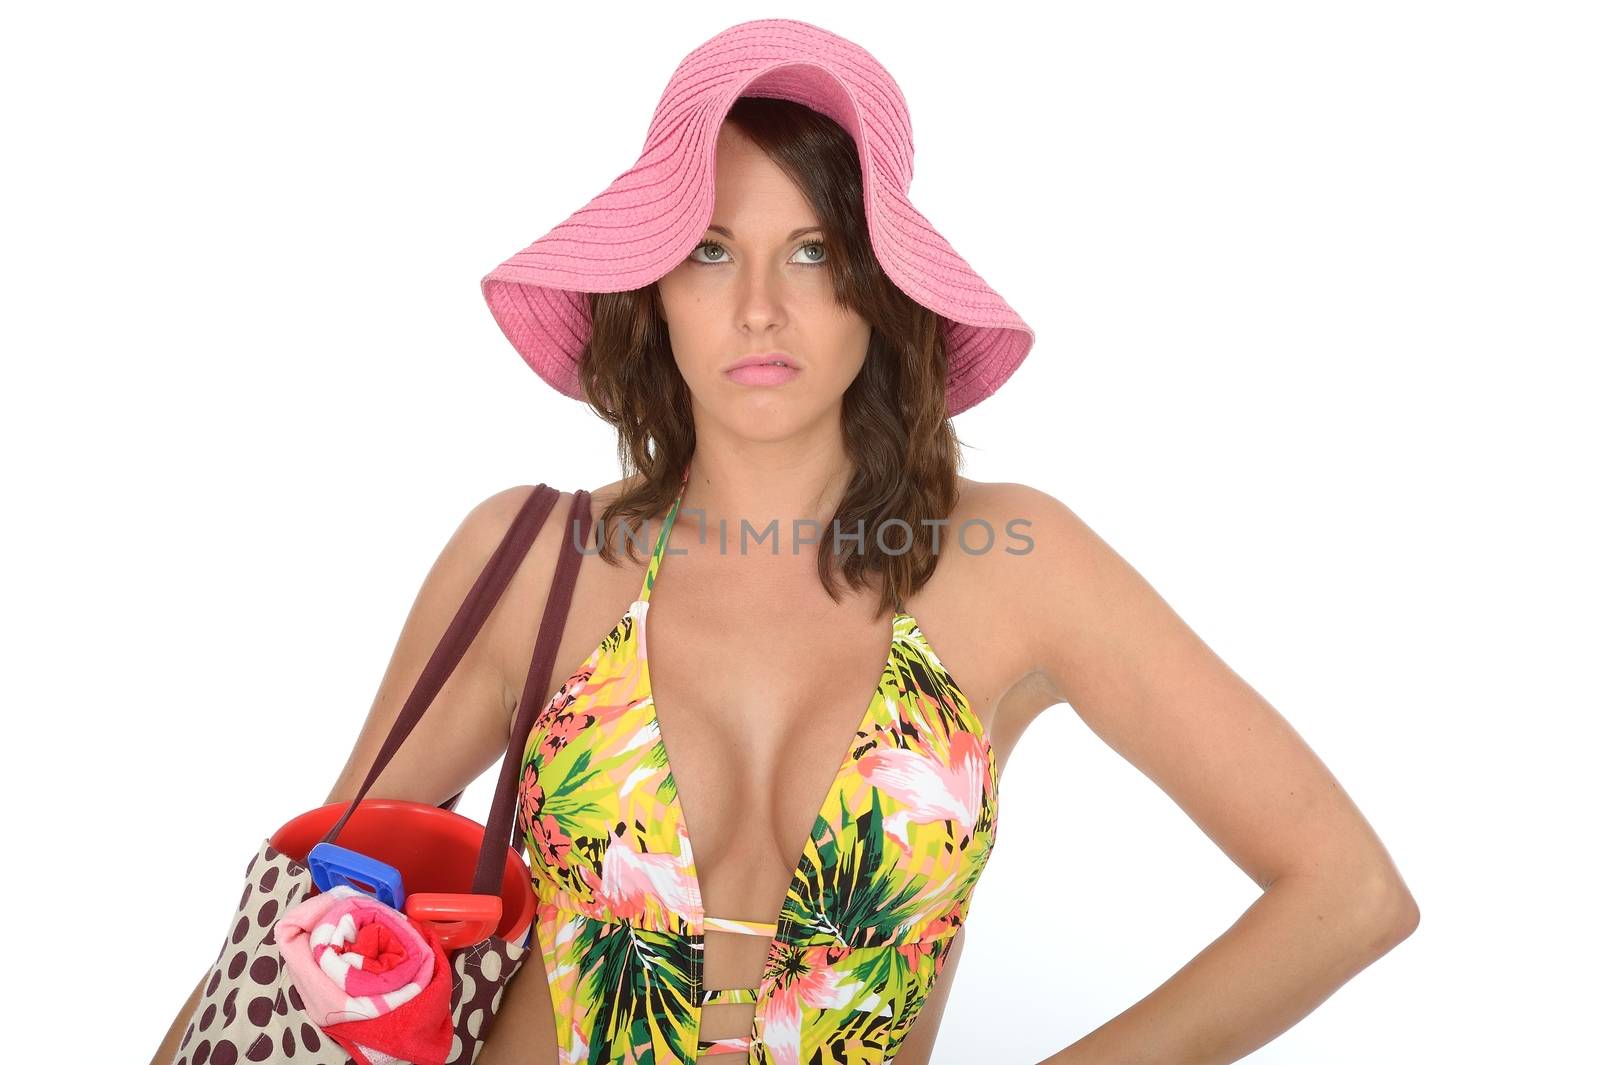 Young Woman Wearing a Swim Suit on Holiday Carrying a Shoulder Bag